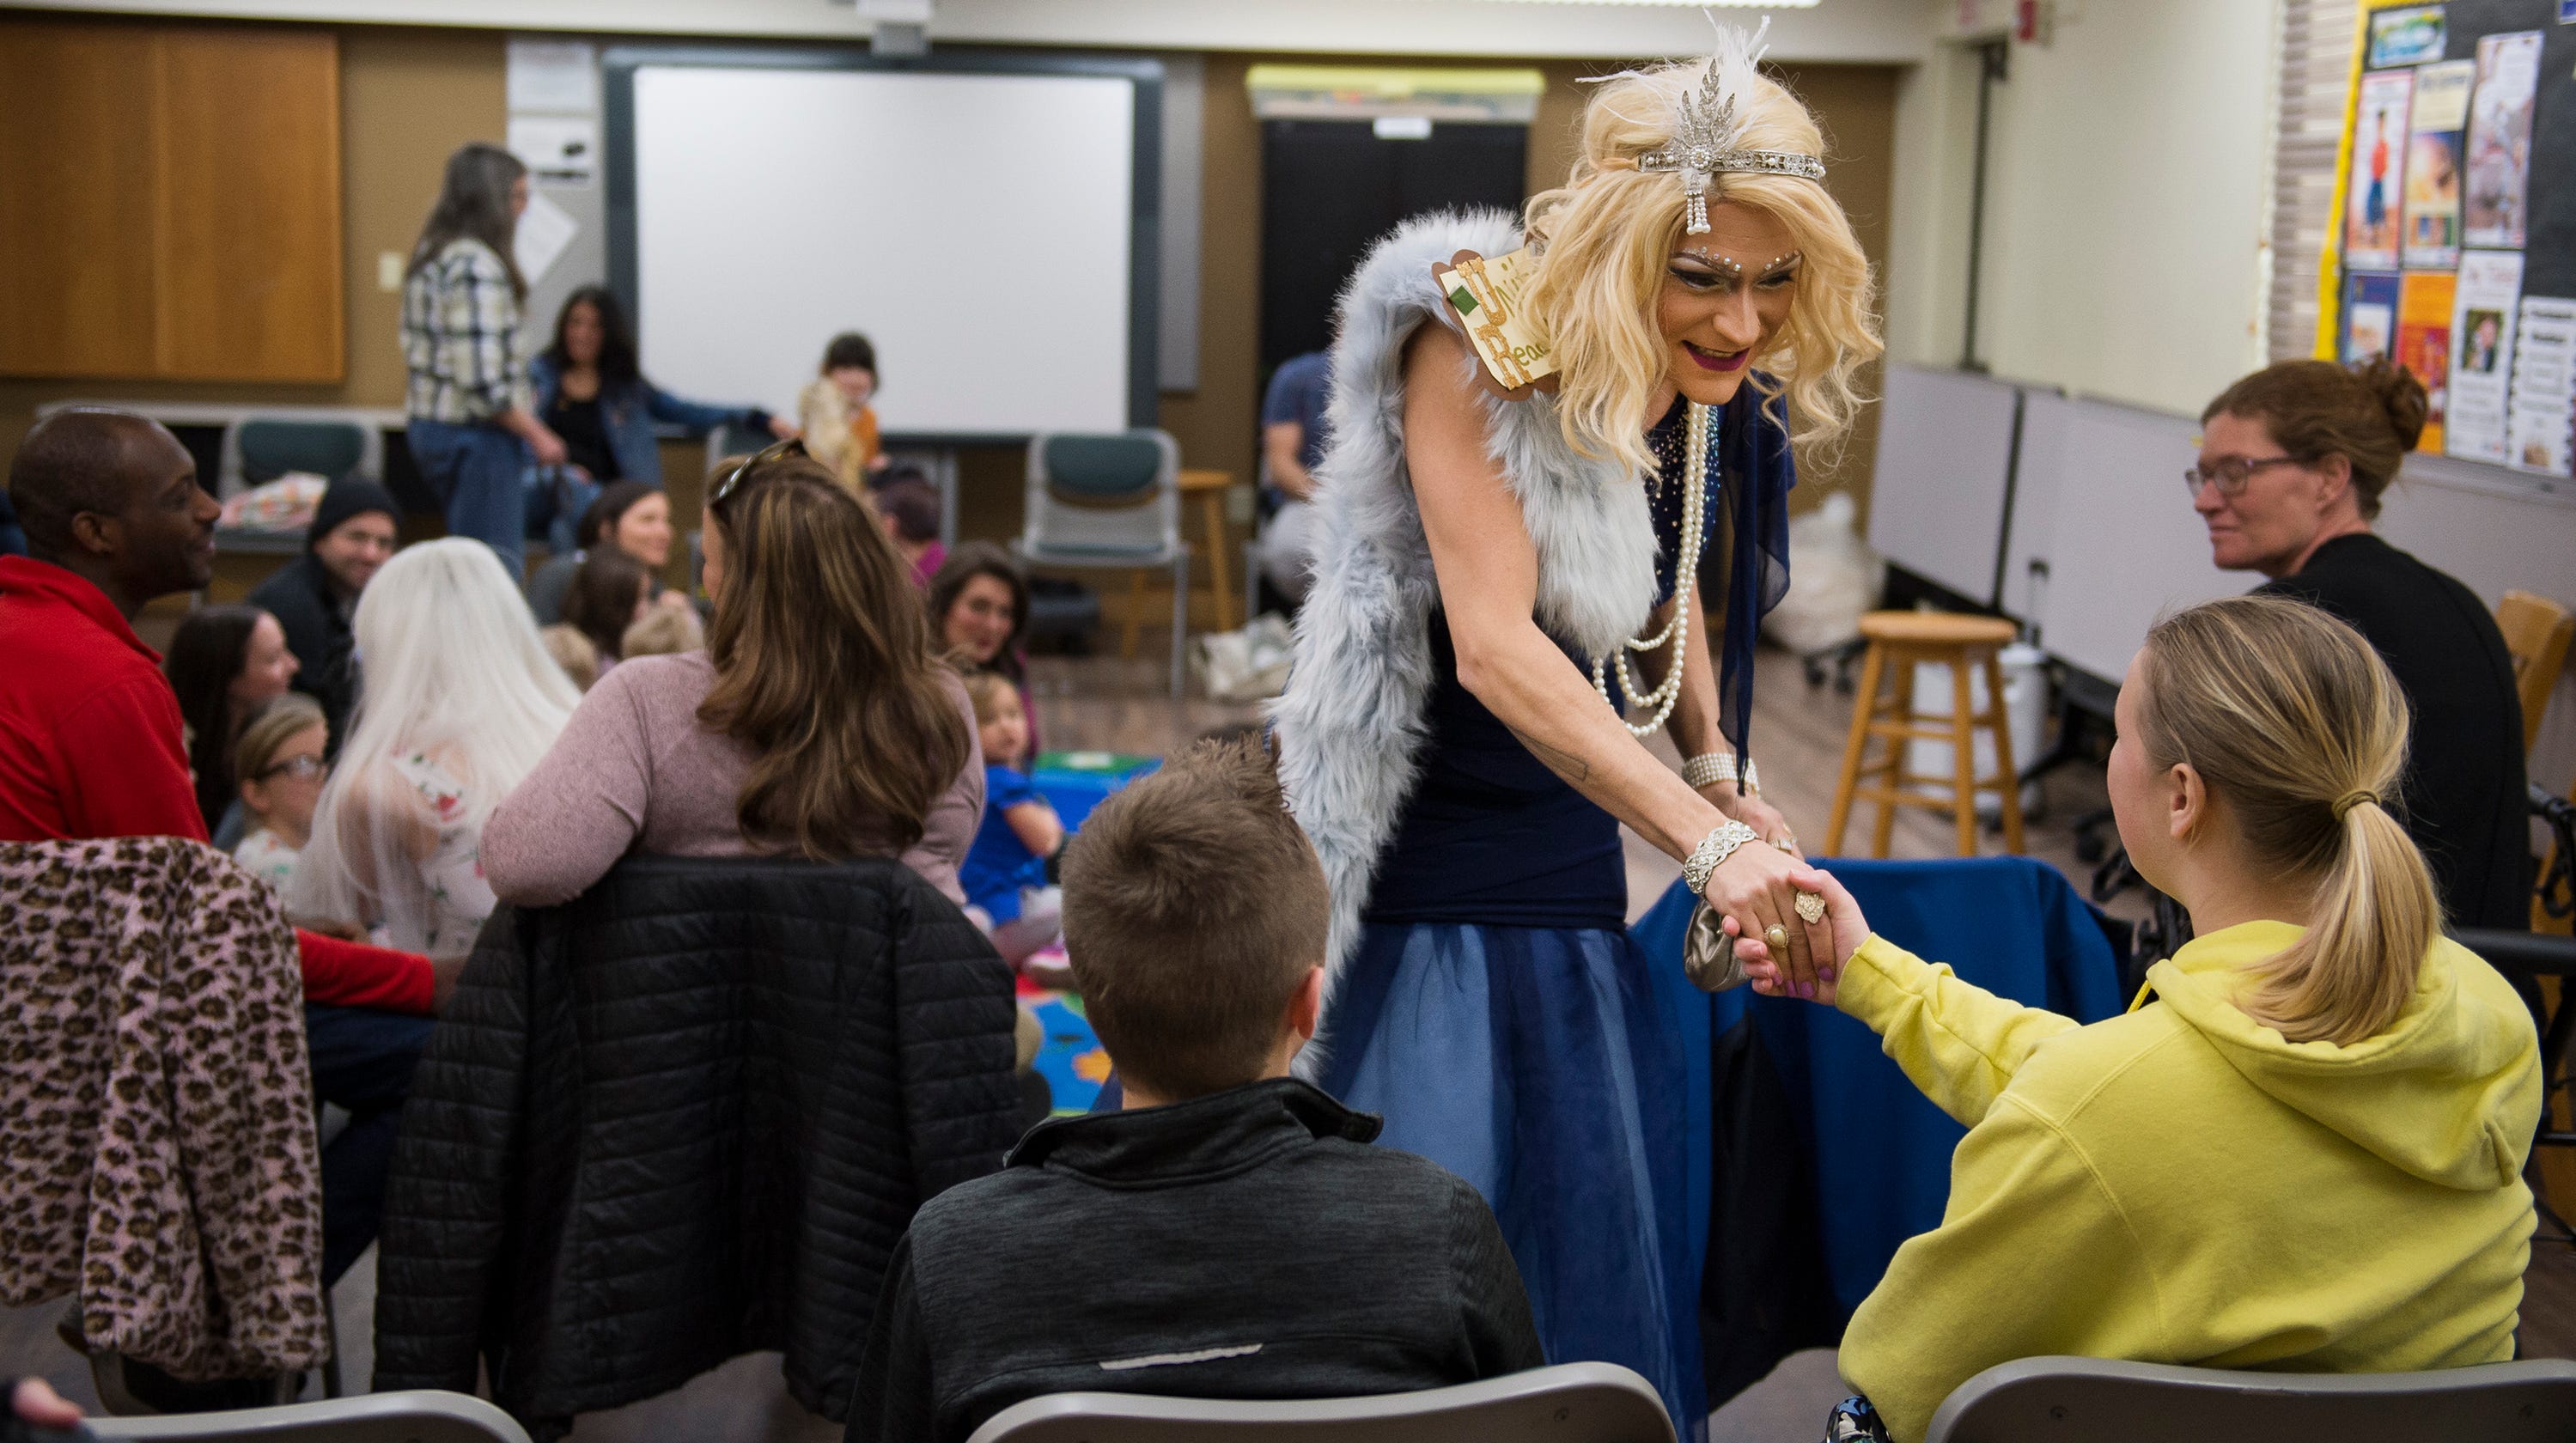 Colorado town's Drag Queen Story Hour draws protesters, counter protesters2999 x 1680